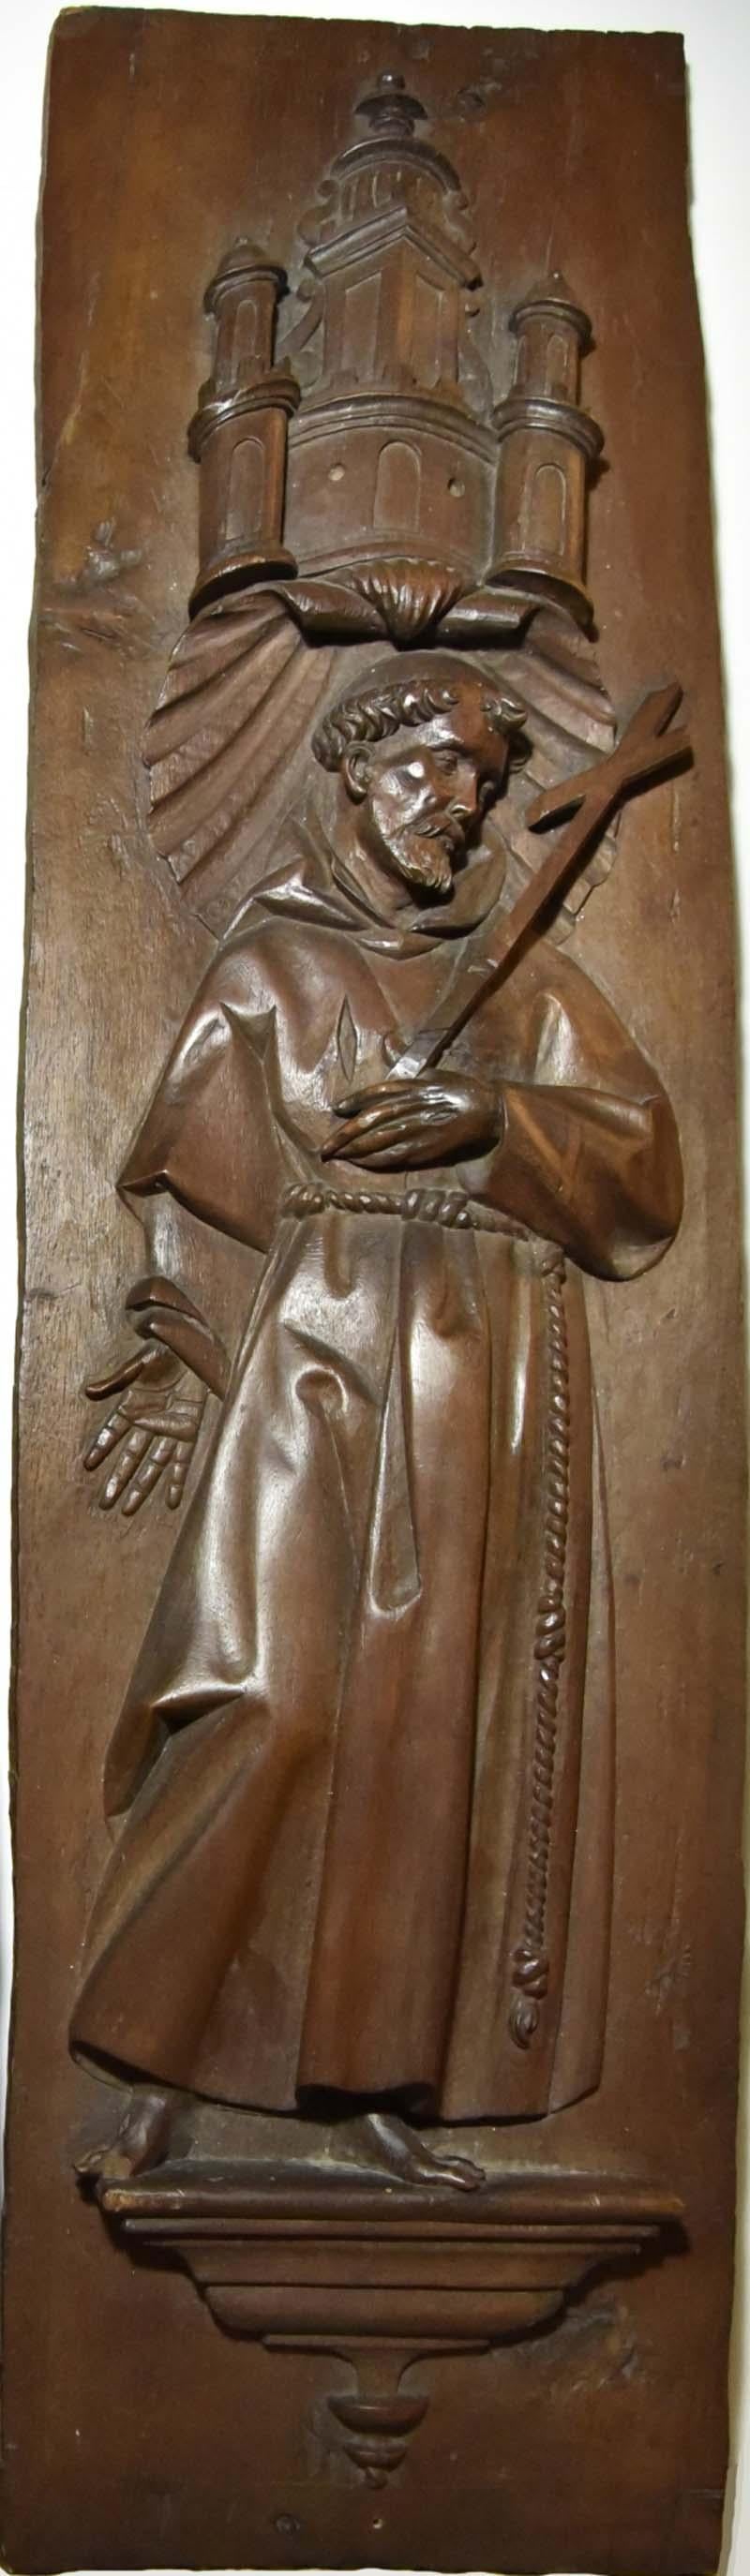 Stall panels around 1600, Bishop and St. Francis of Assisi - Brown Figurative Sculpture by Unknown